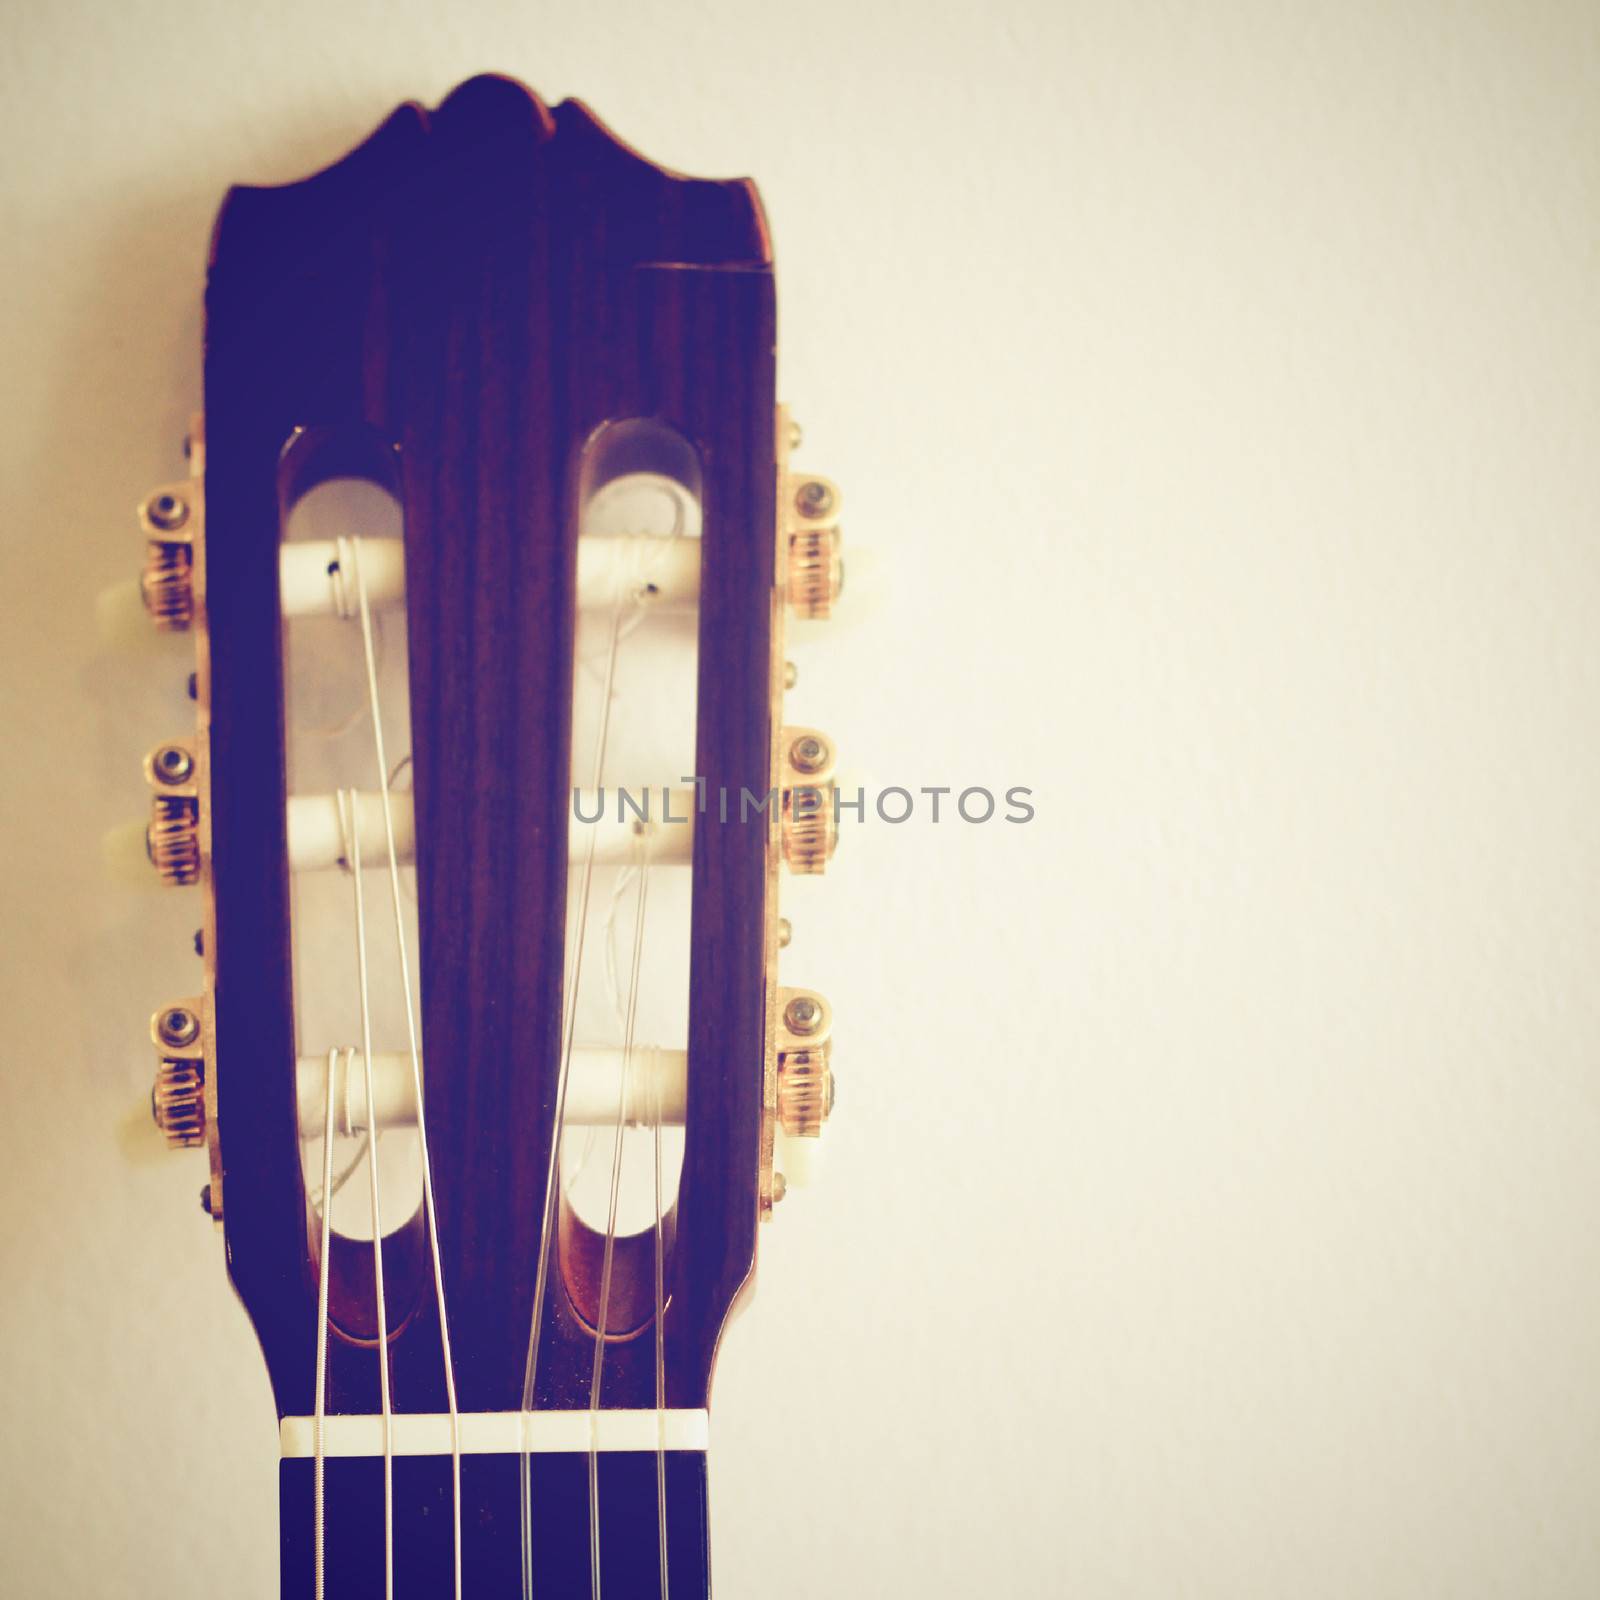 Classical guitar head with retro filter effect by nuchylee